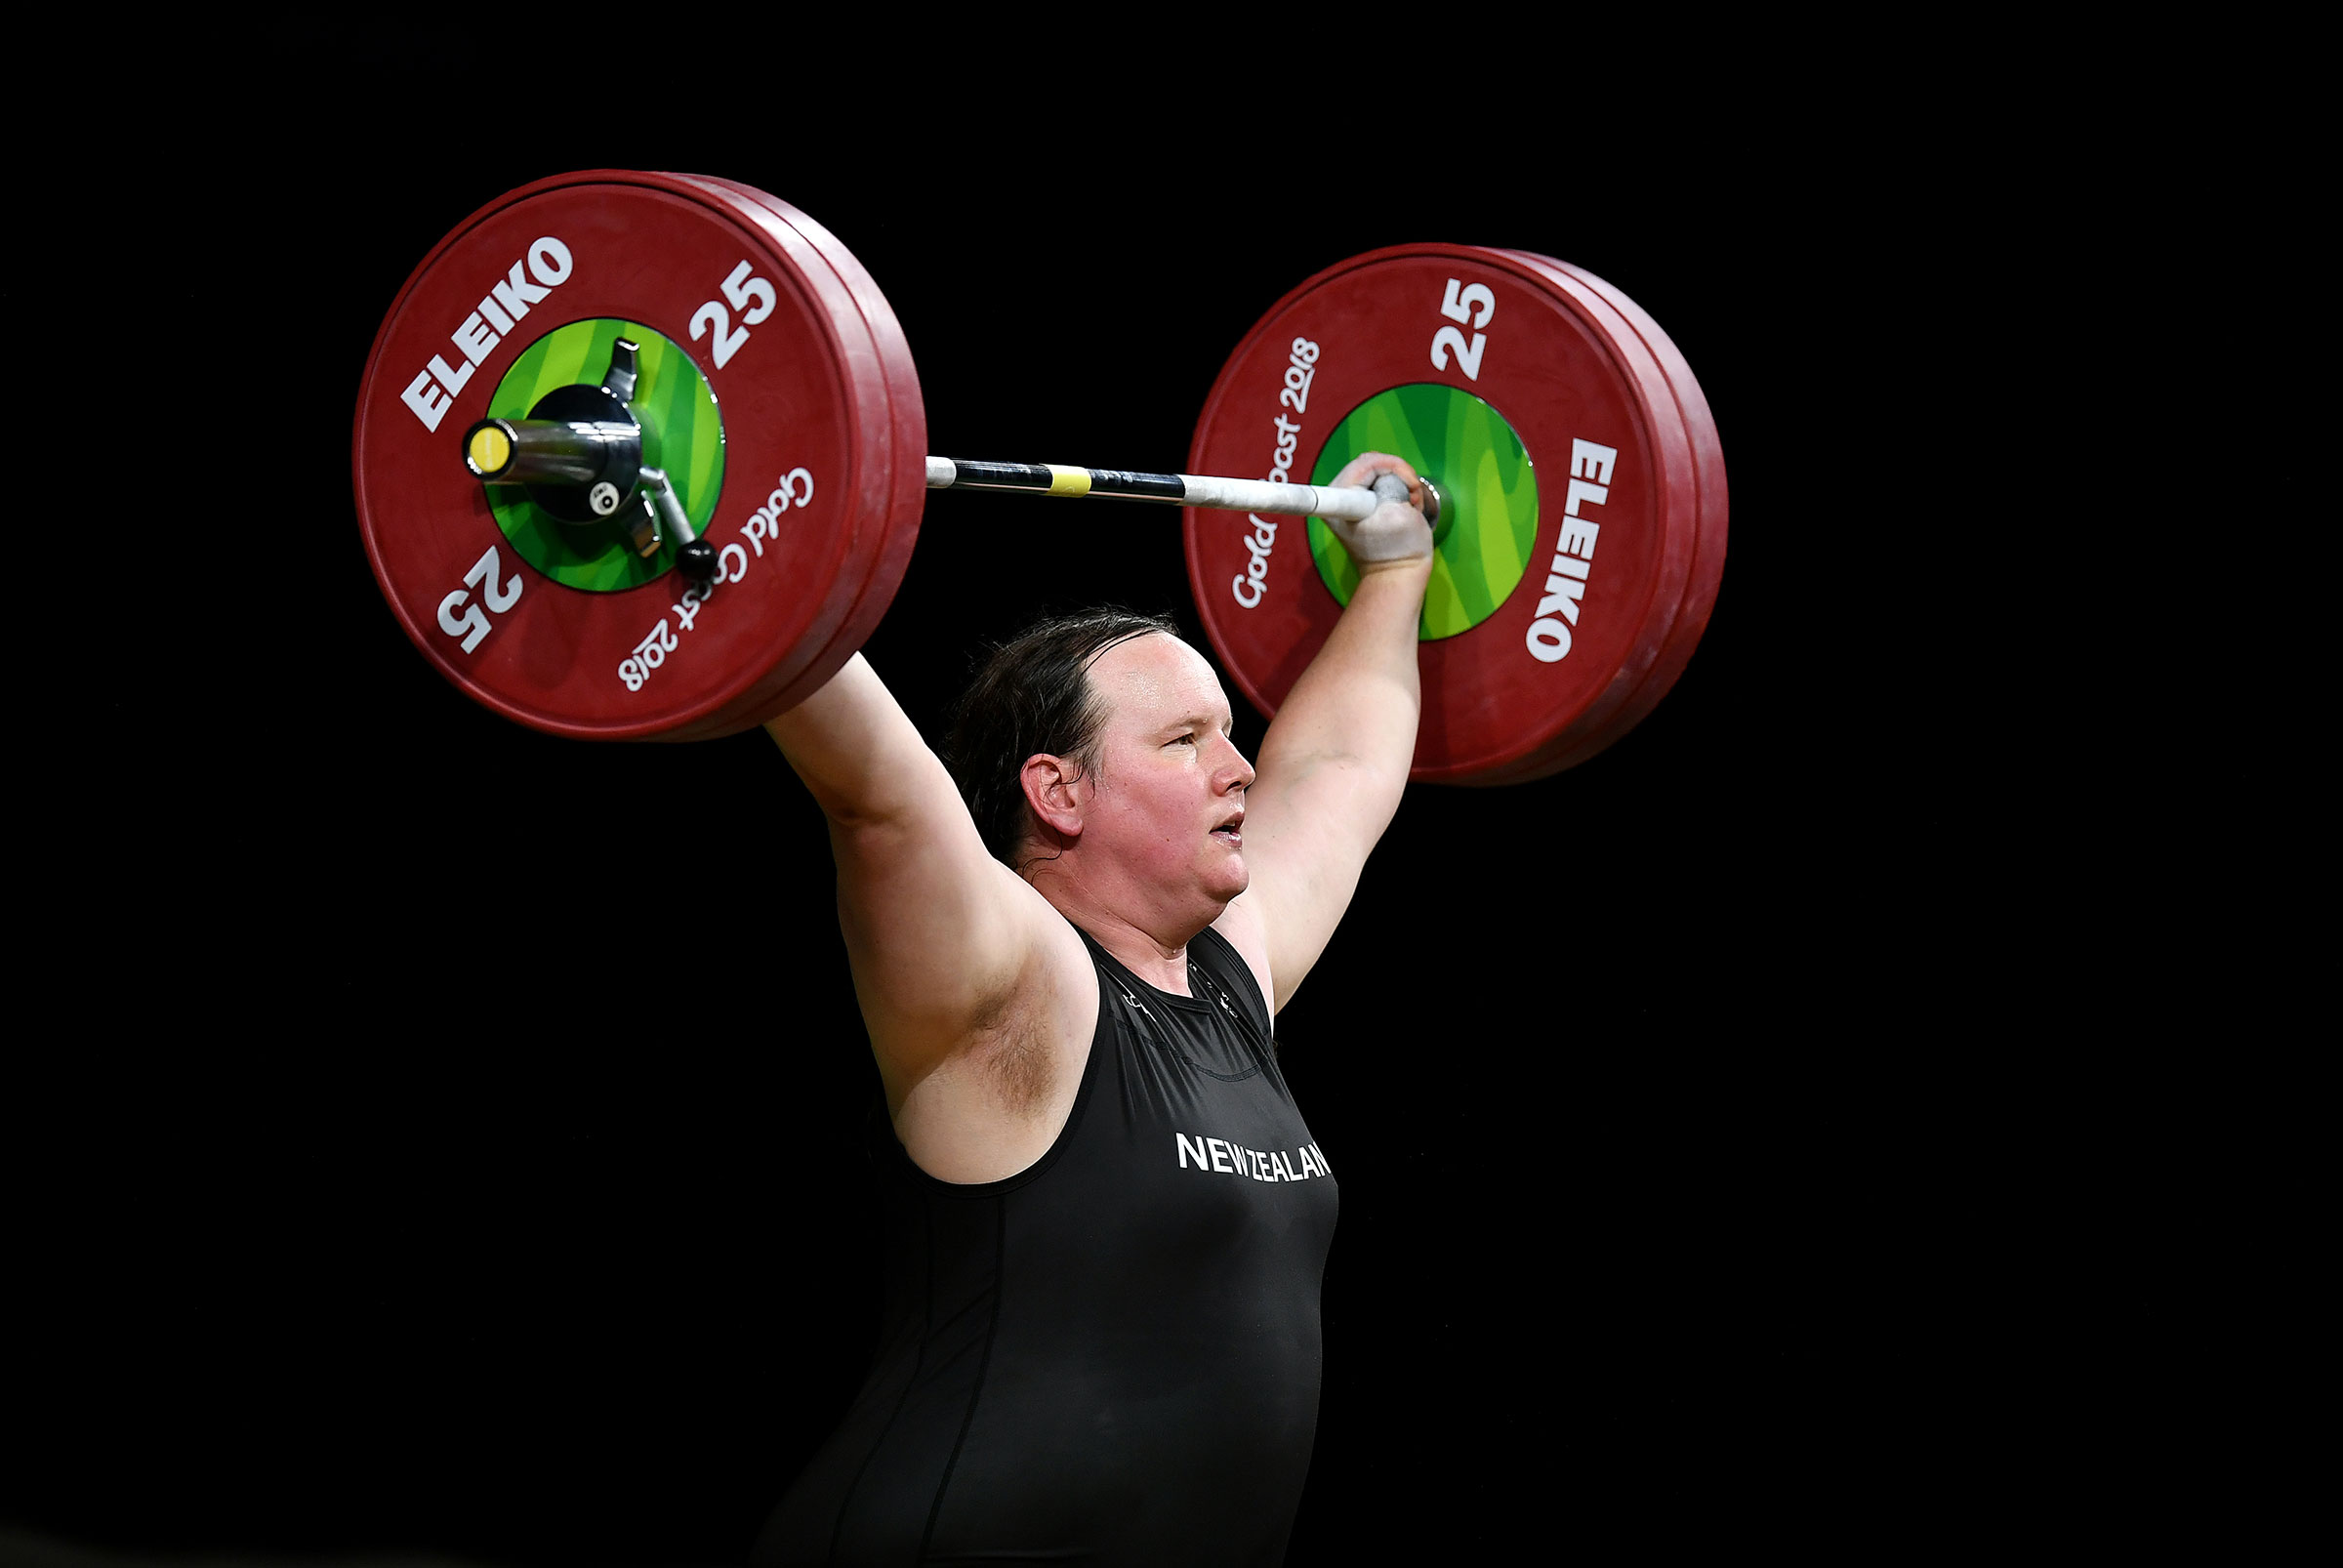 Laurel Hubbard of New Zealand competes in the Women's +90kg Weightlifting Final during the Gold Coast 2018 Commonwealth Games on April 9, 2018 on the Gold Coast, Australia. (Dan Mullan—Getty Images)